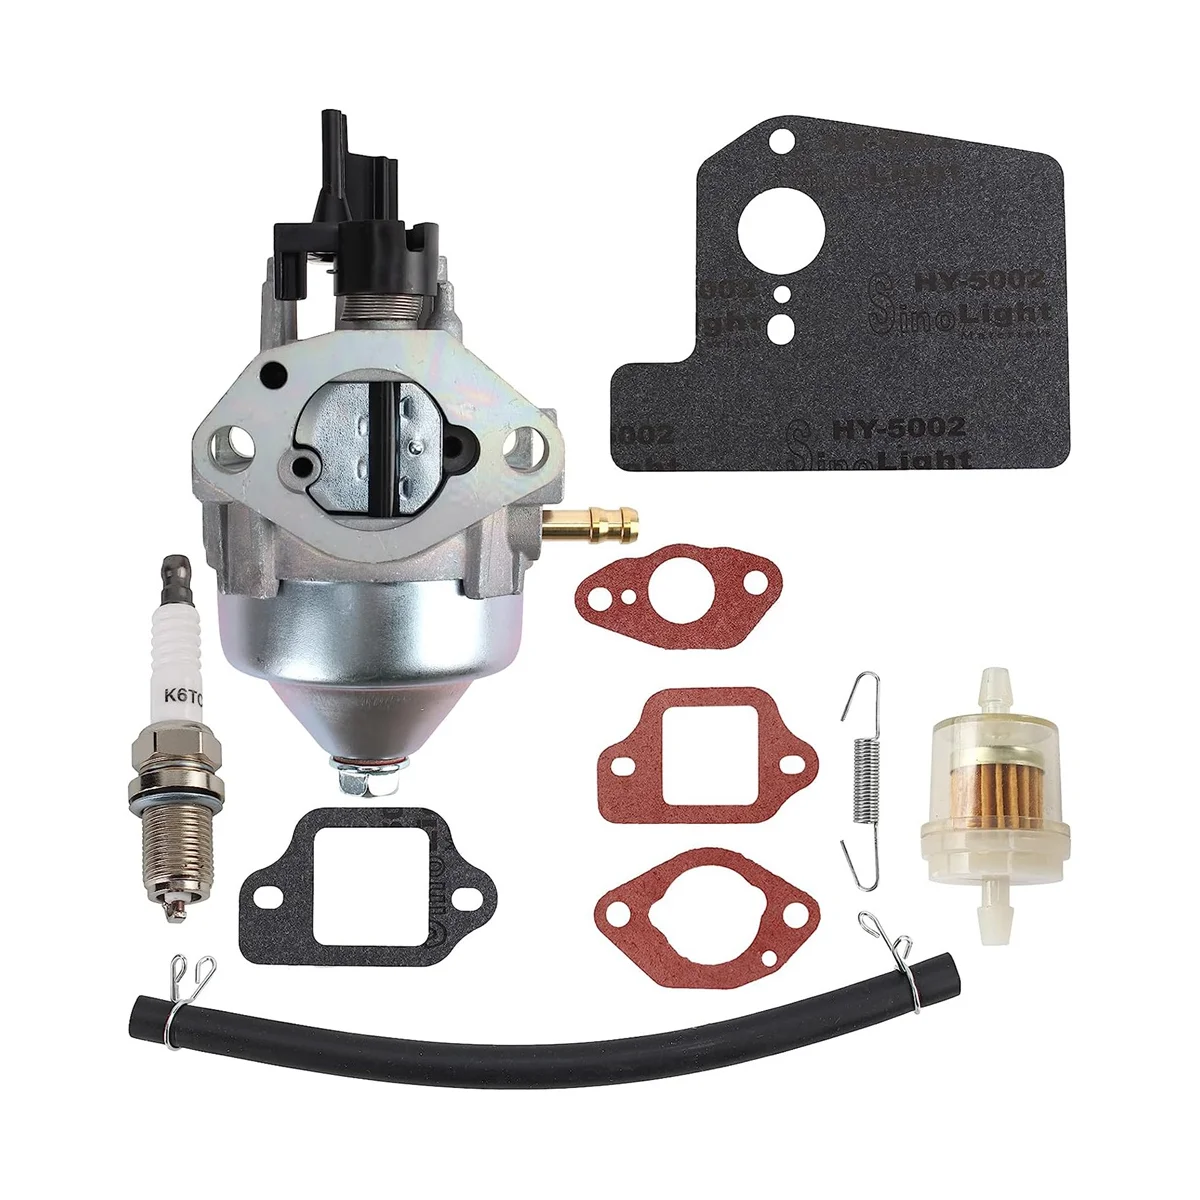 

Carburetor Carb Assembly W/Tune Up Kit for Honda HRR216K10 HRR216K11 HRR216K9 HRS216K5 HRS216K6 HRS216K7 Lawnmowers